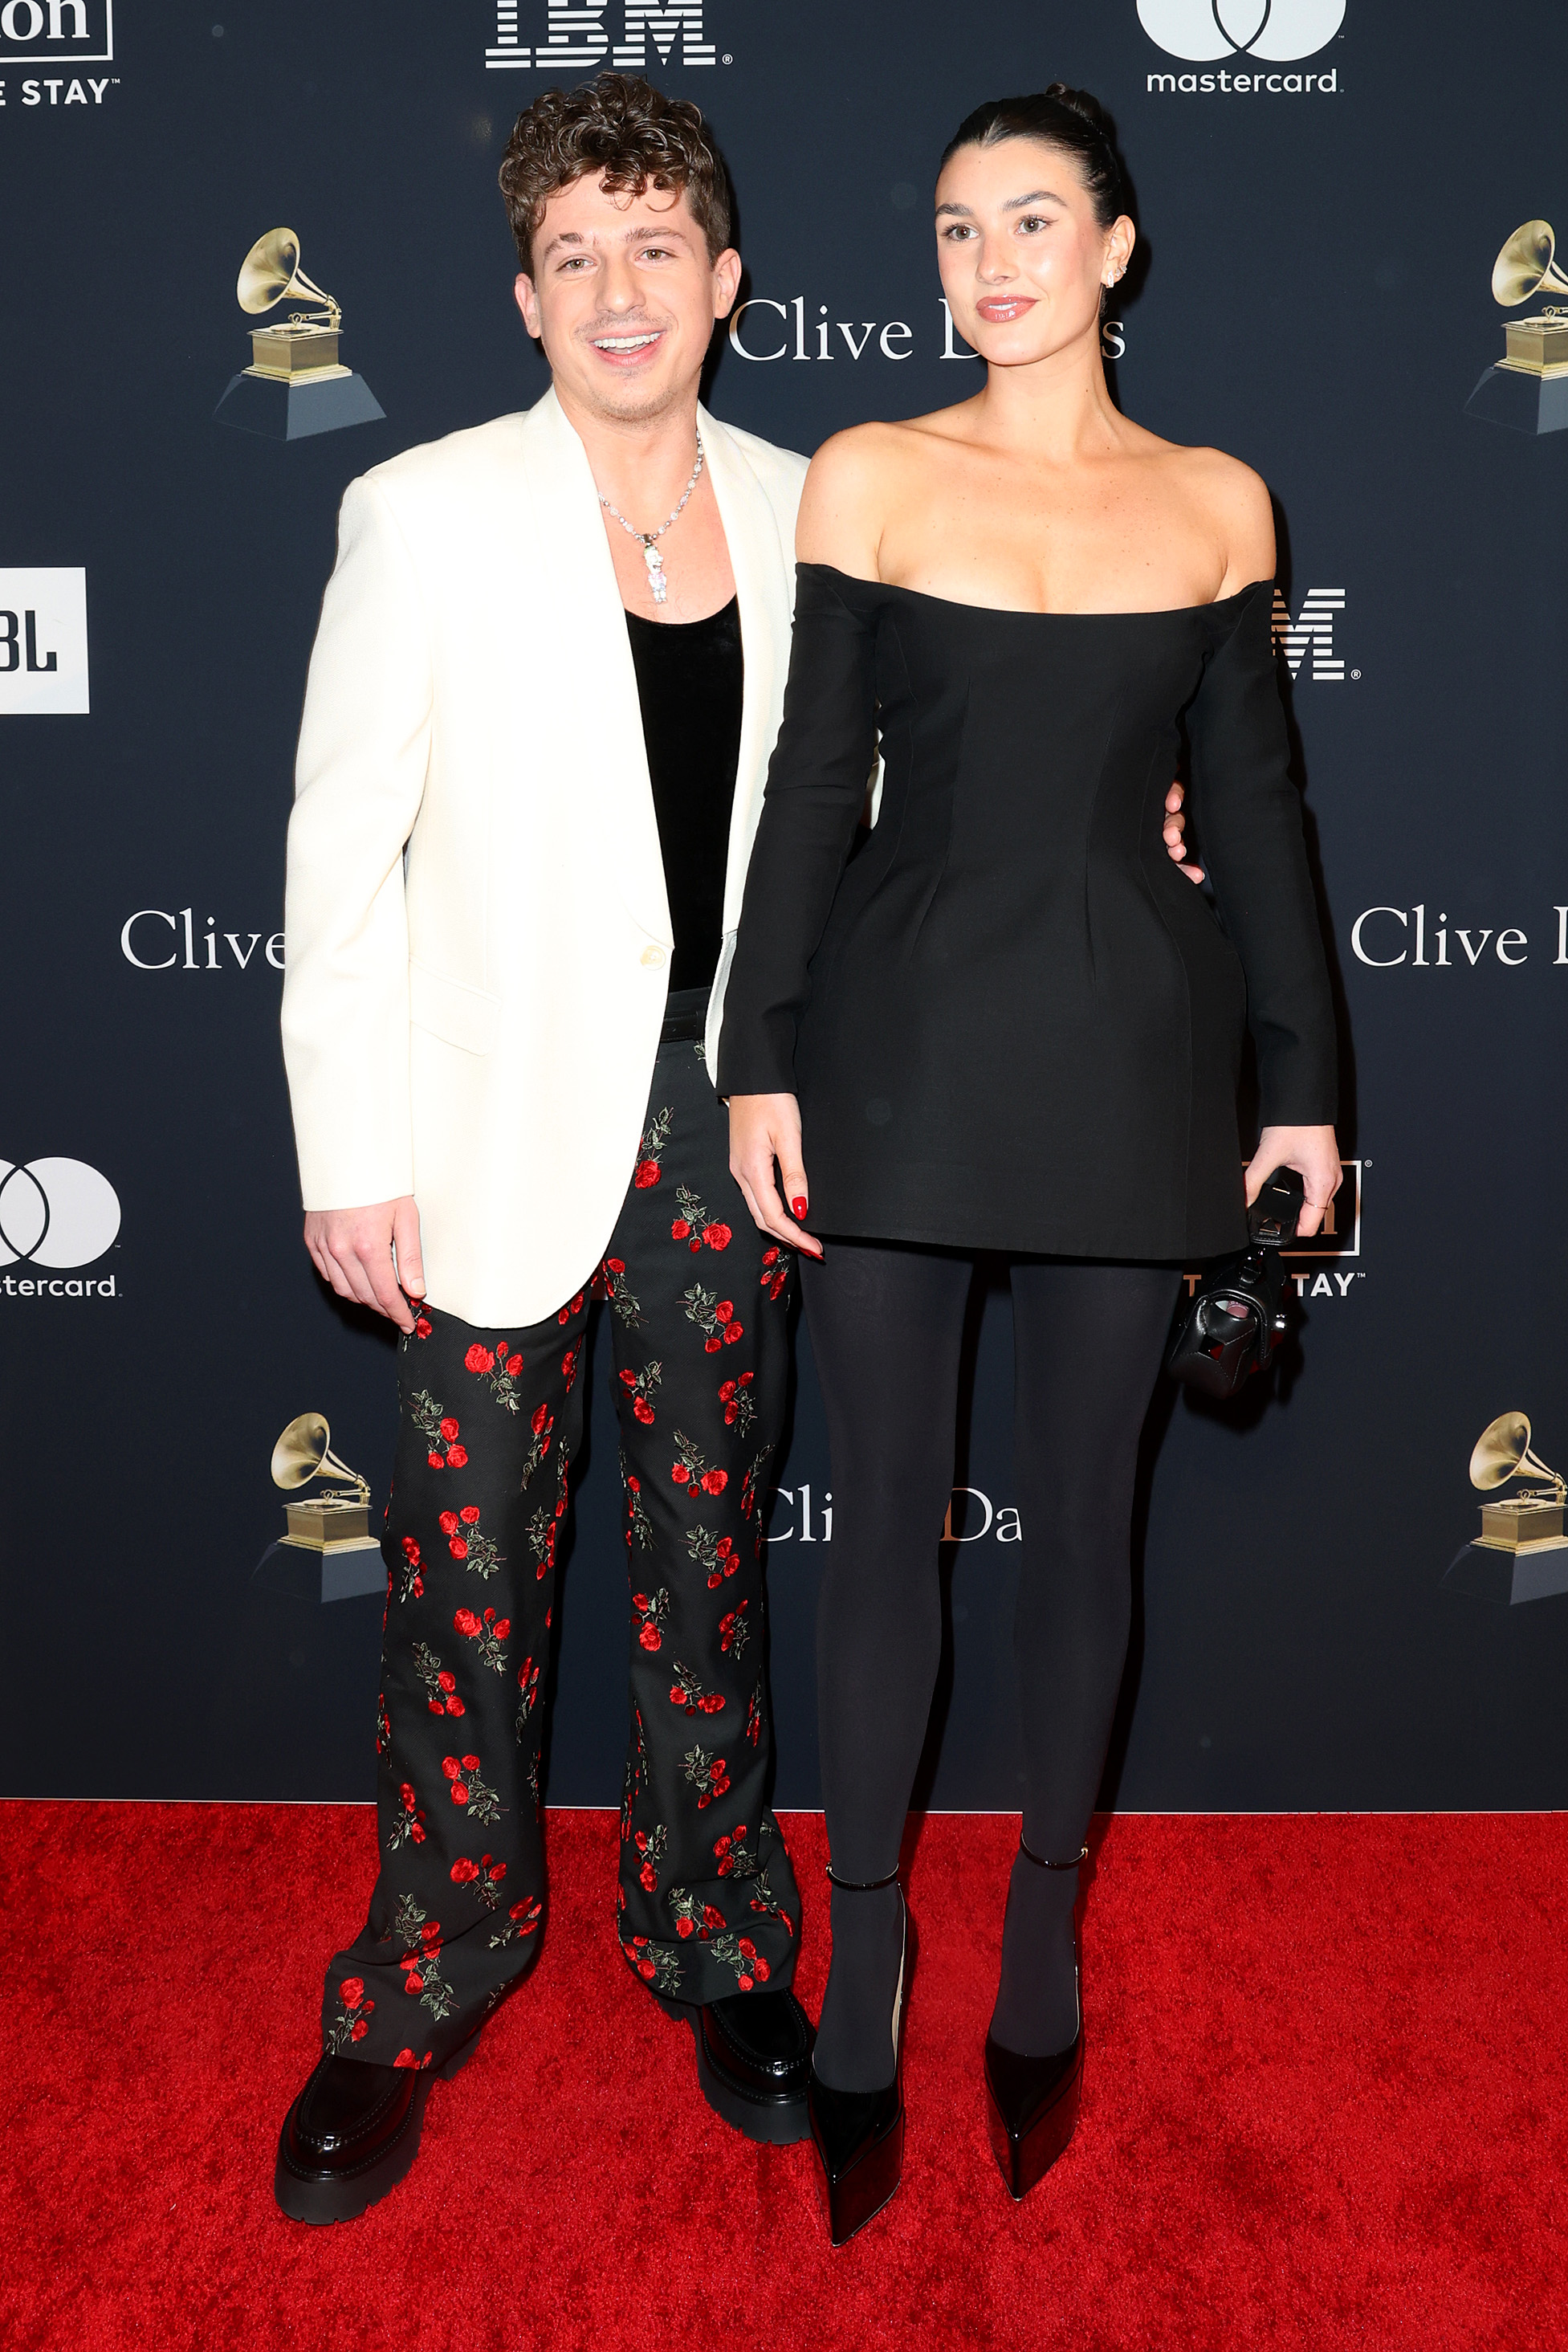 Charlie Puth and Brooke Sansone at Pre-GRAMMY party (Image: Getty Images) 